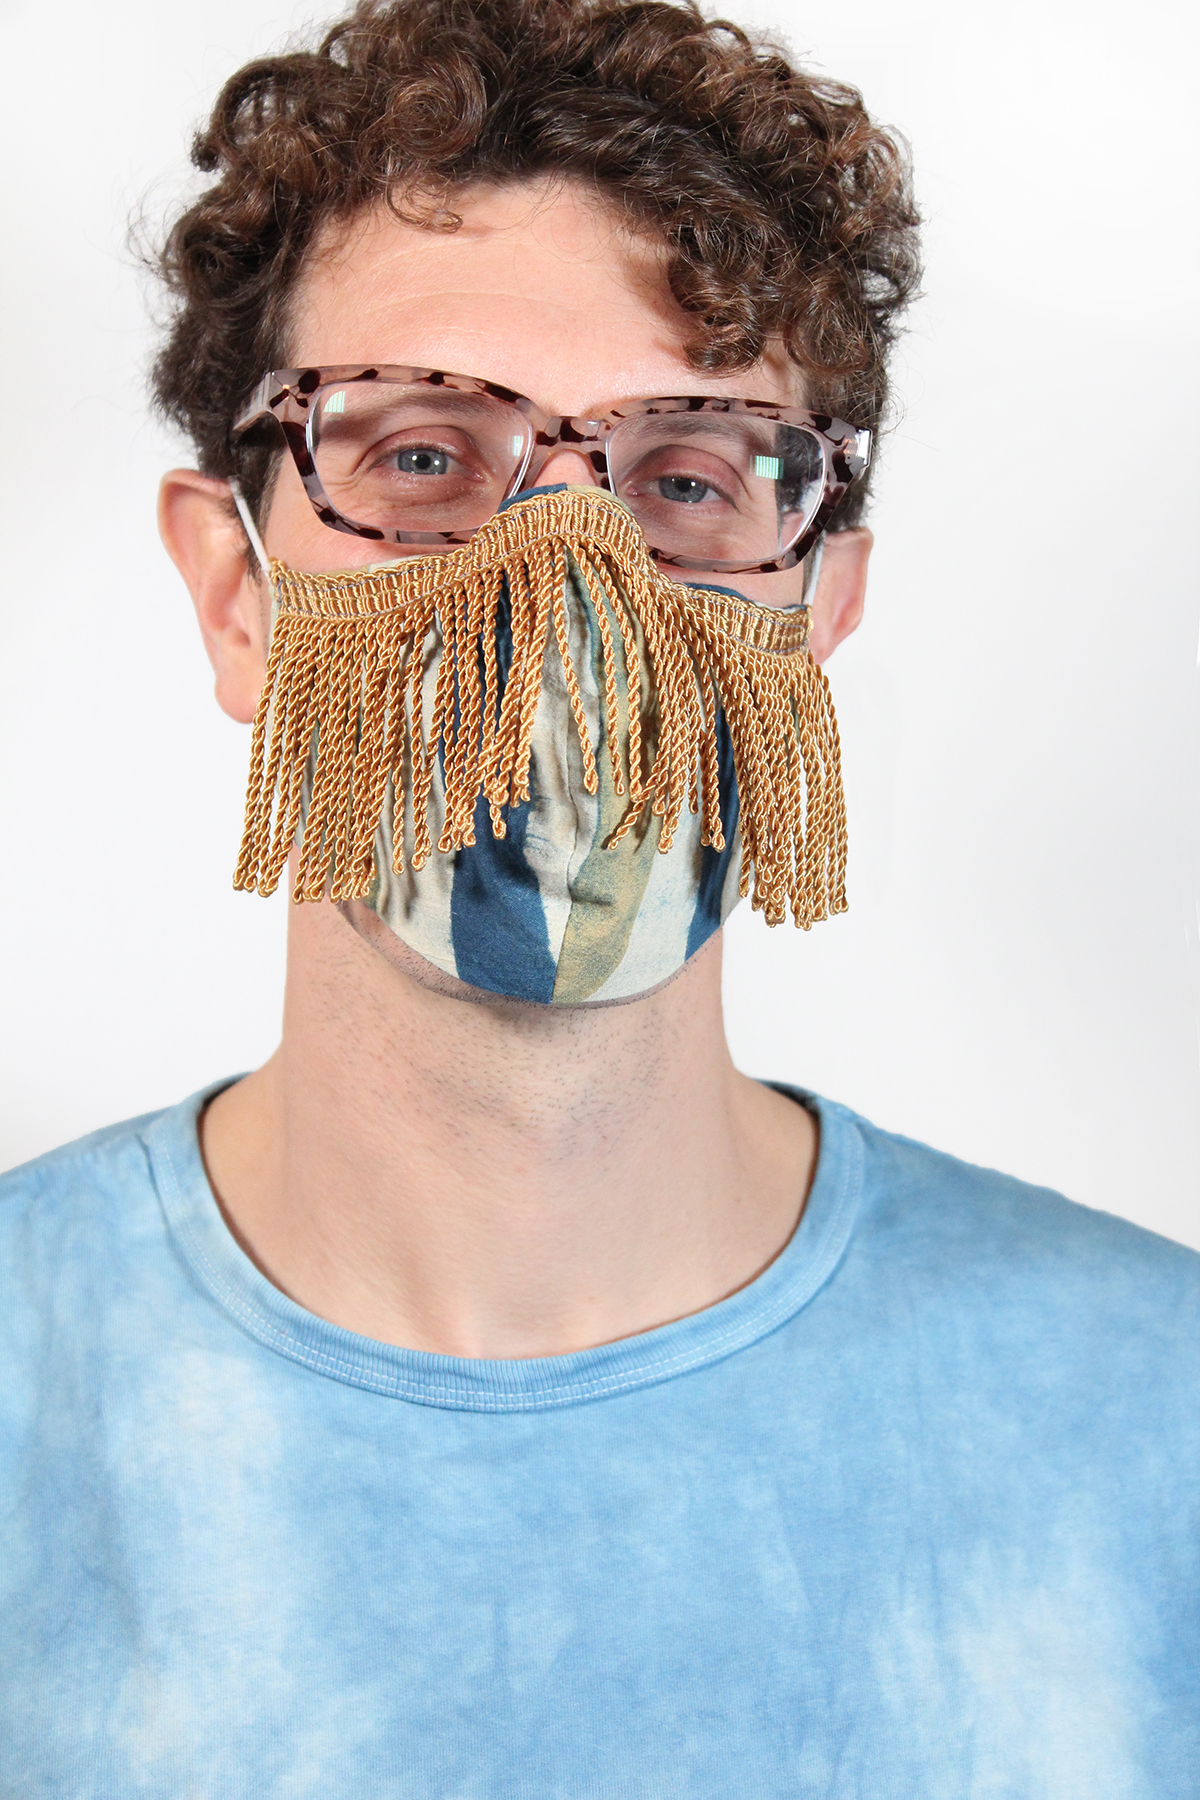 Face covering mask with Gold fringe on male model